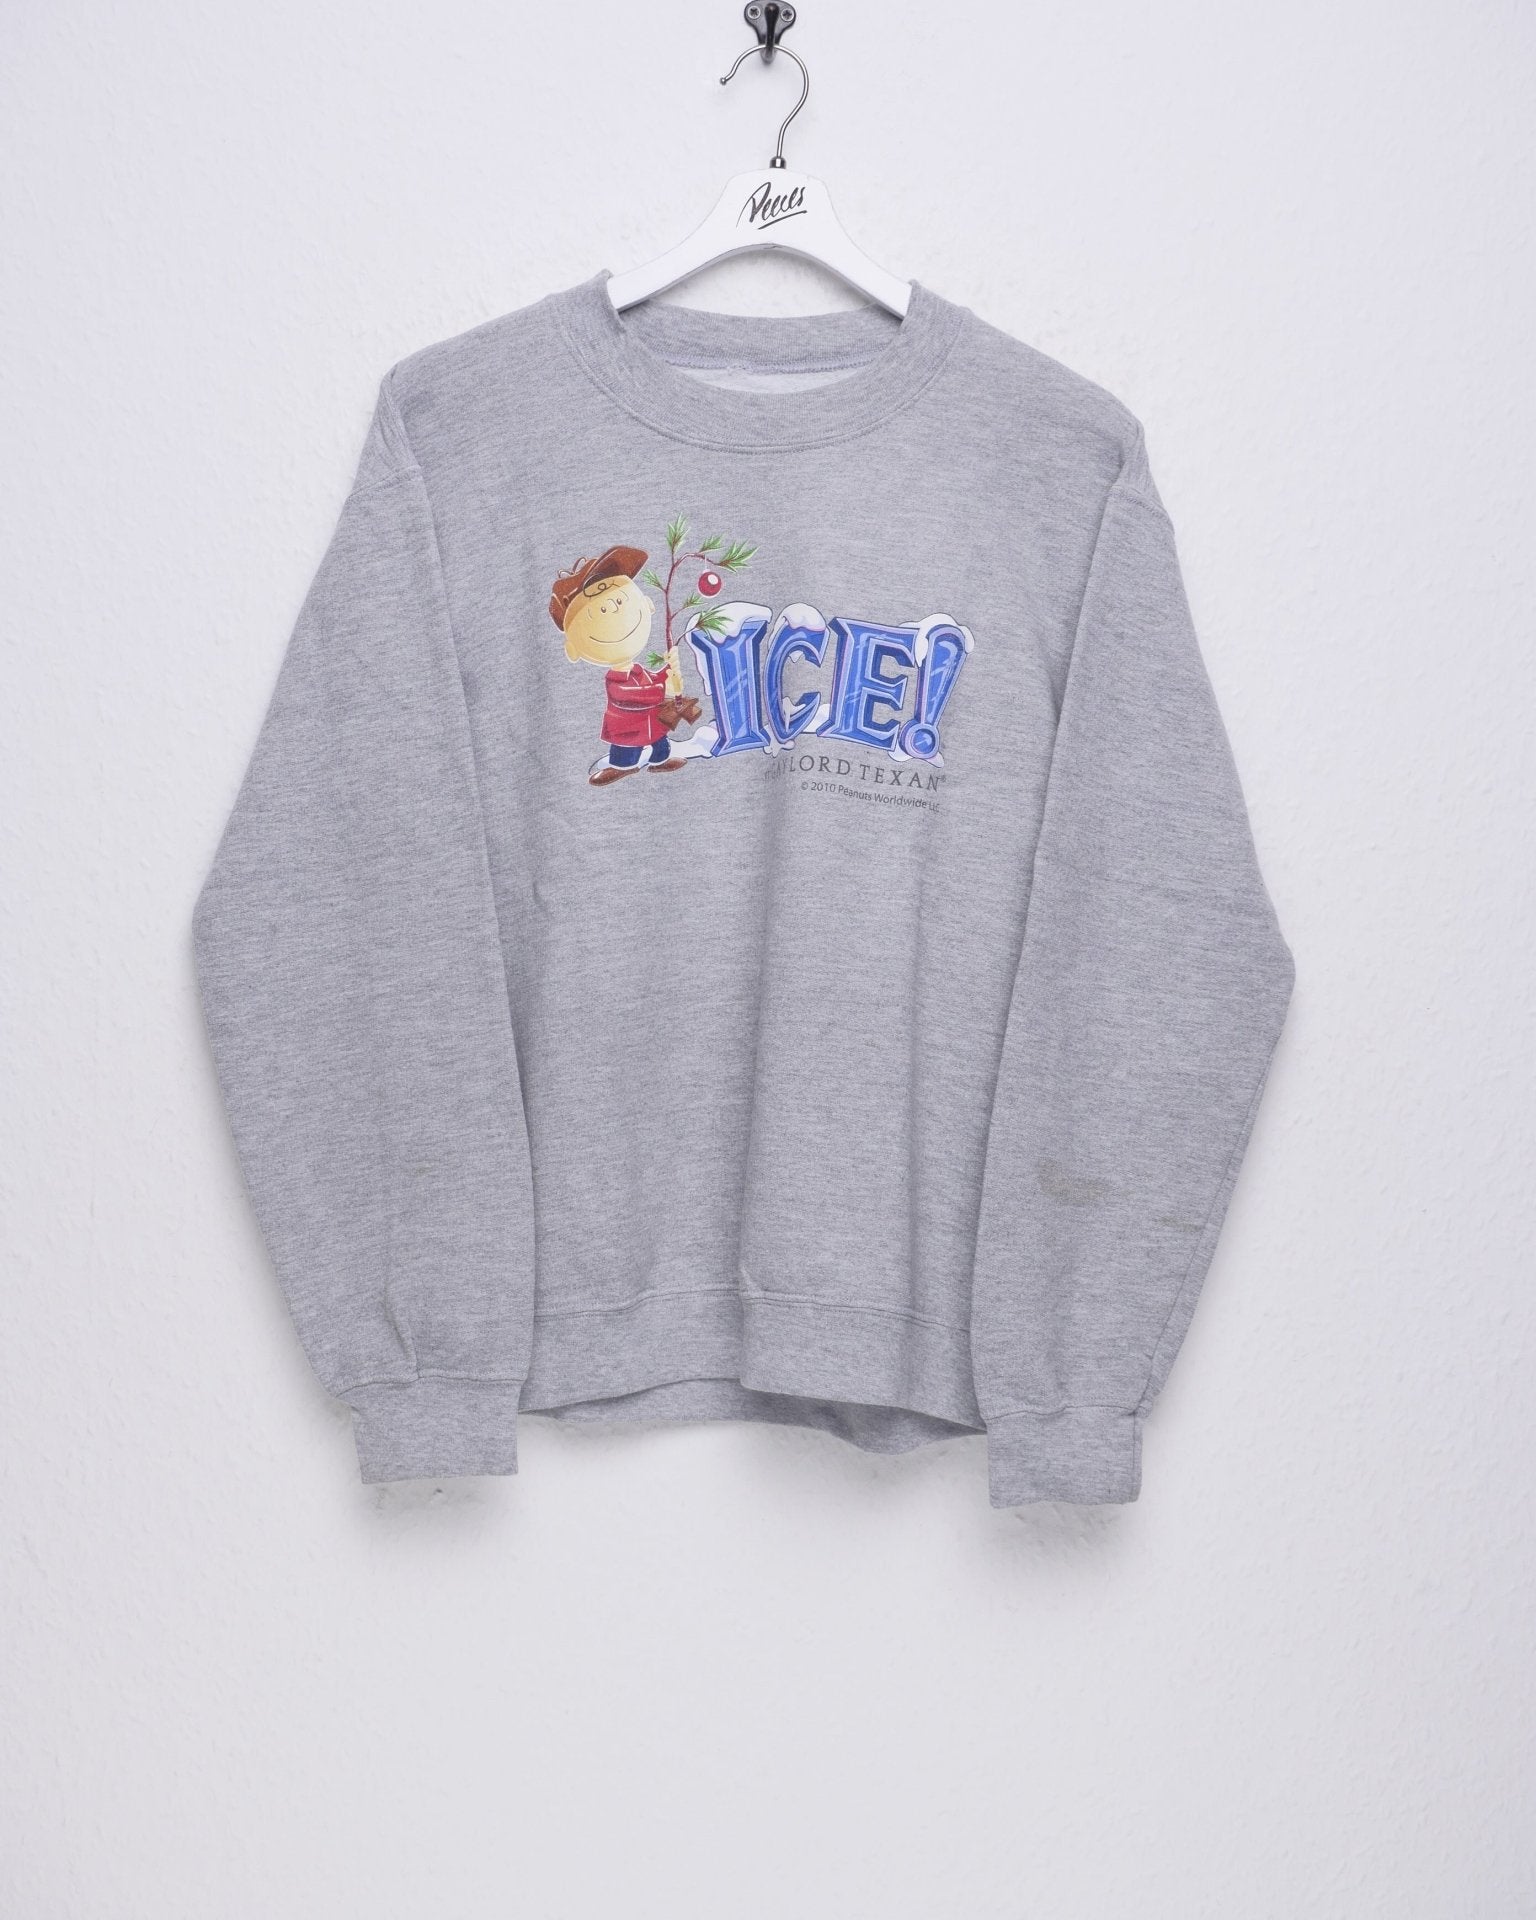 ICE! printed Spellout Vintage Sweater - Peeces